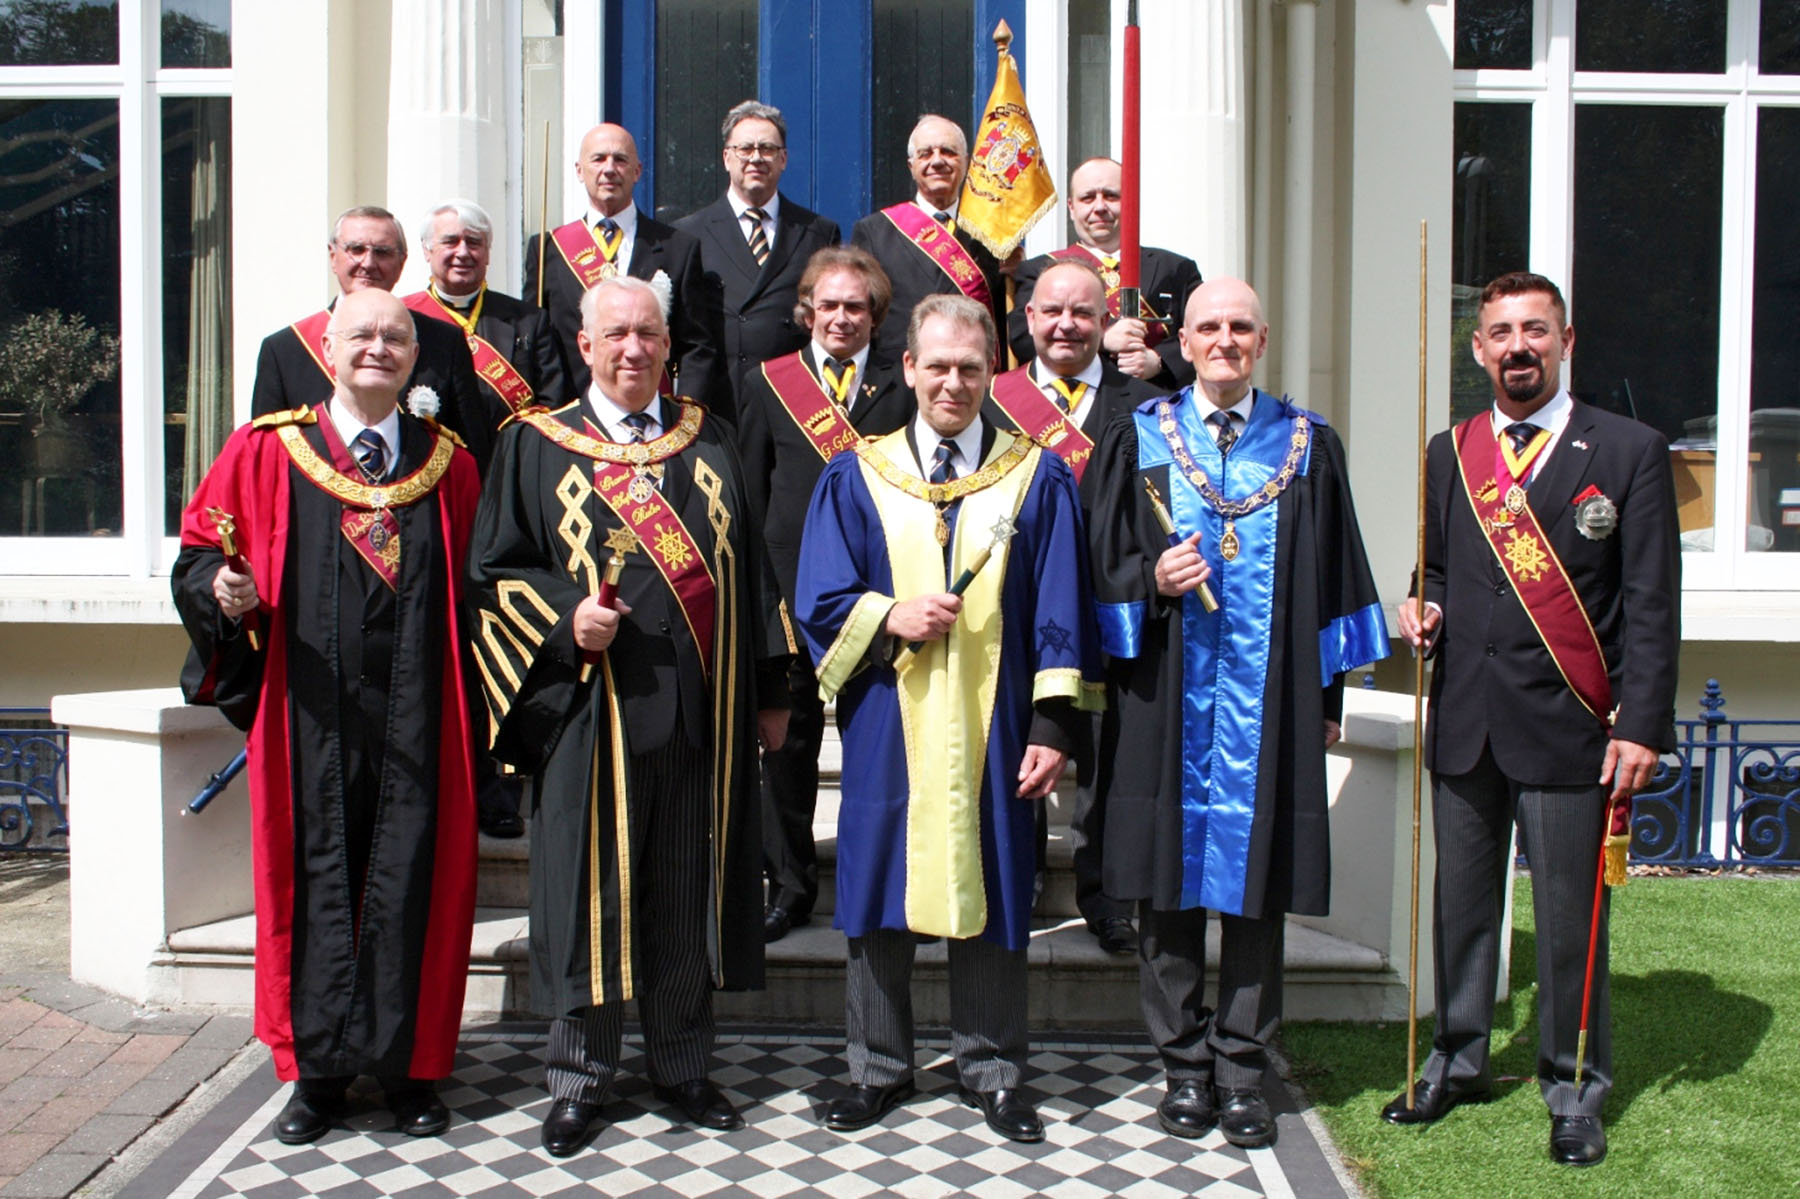 The Installation of a new Provincial Grand Supreme Ruler